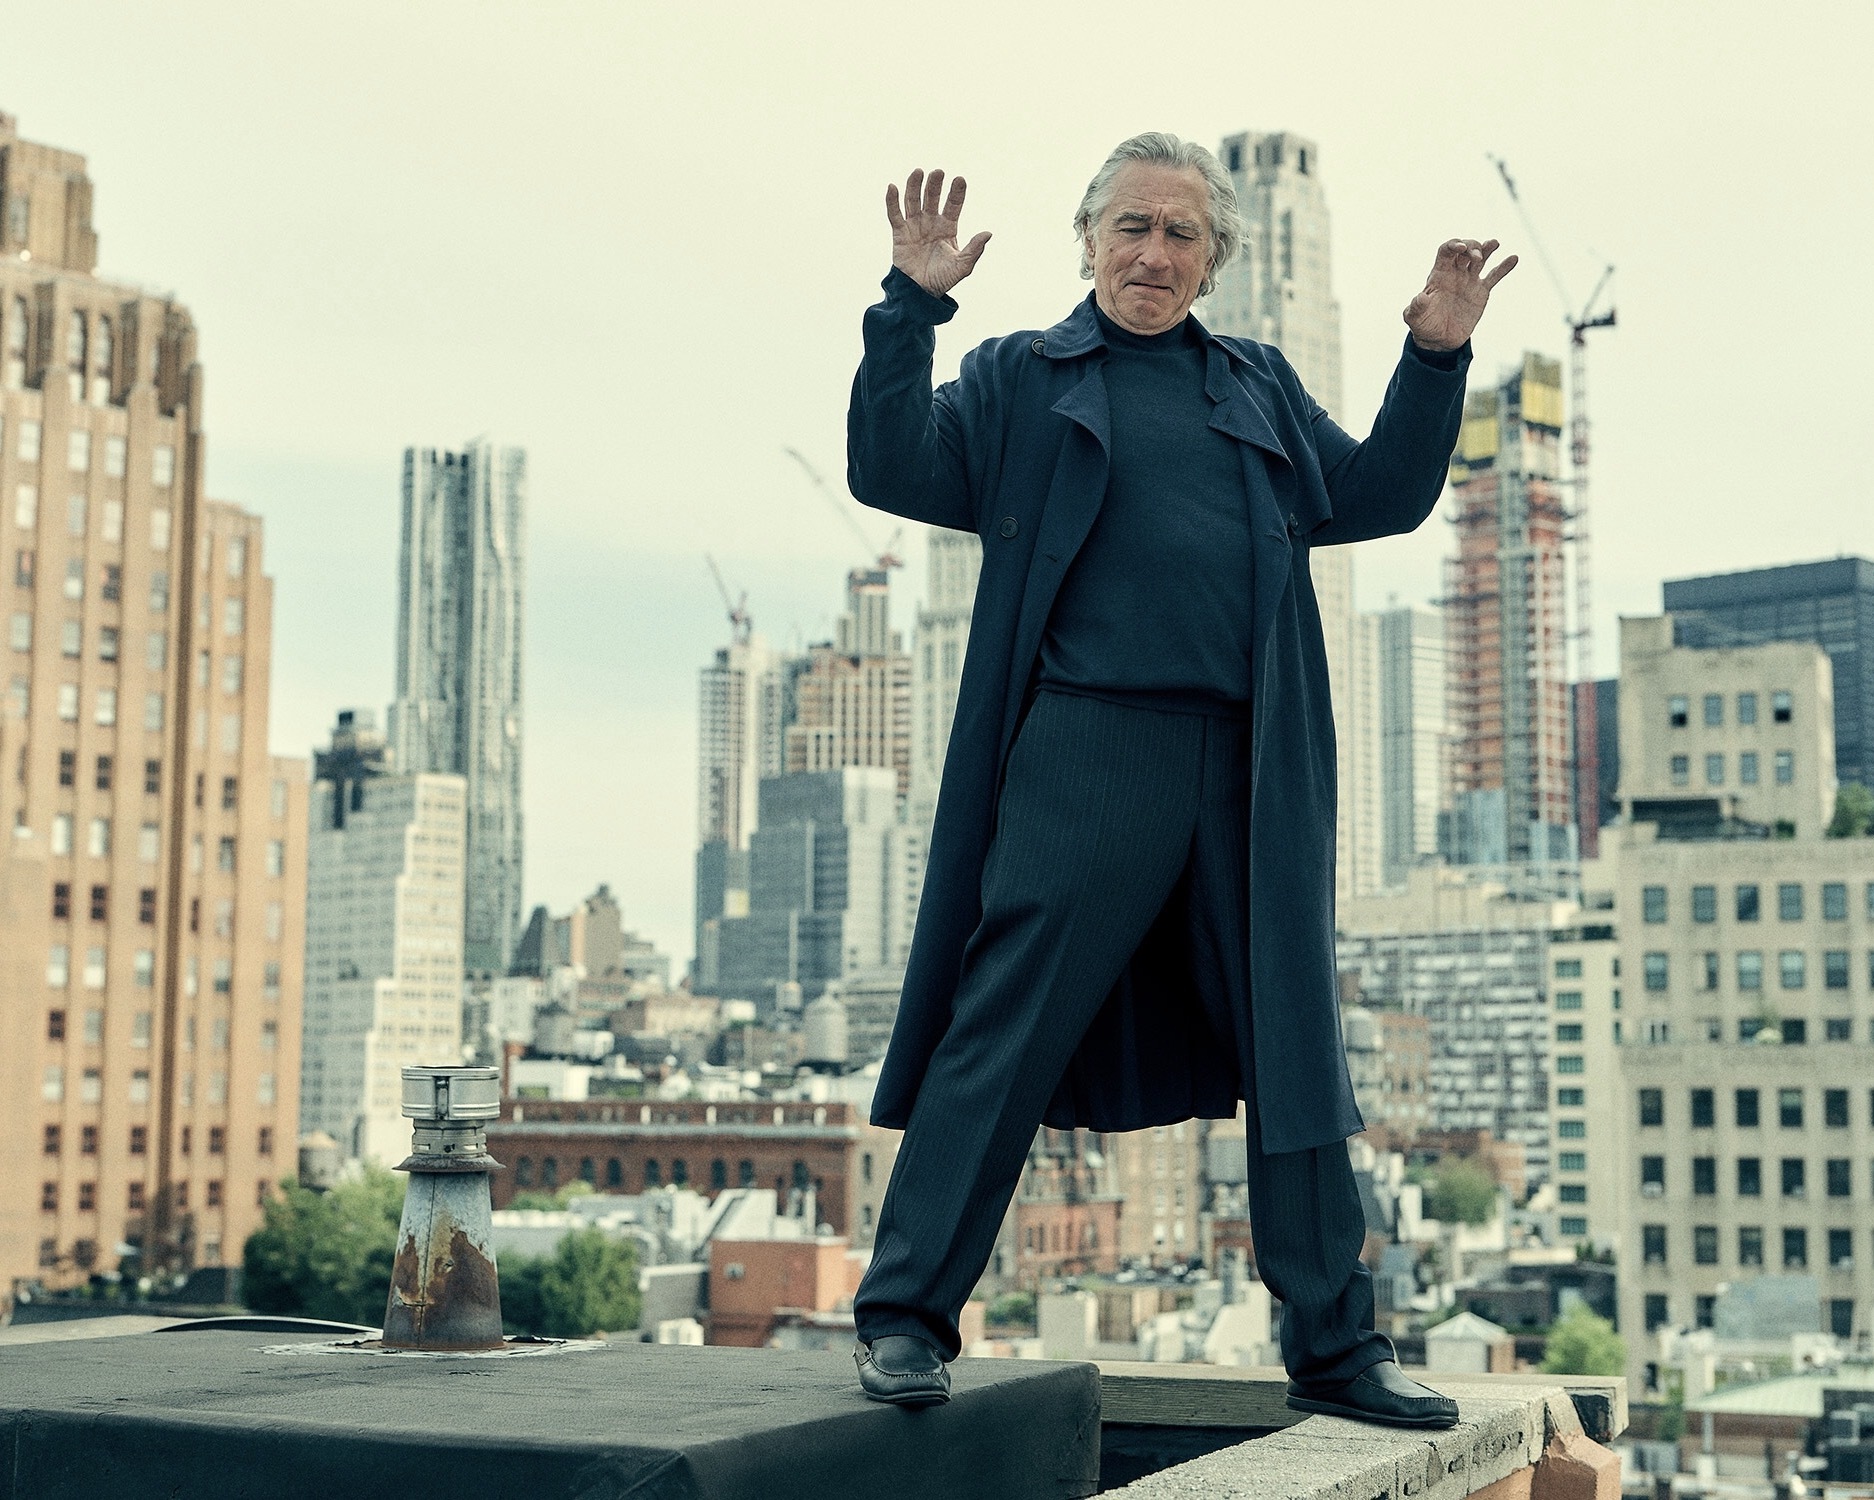 He's cool at any age - Robert DeNiro, Actors and actresses, The photo, Celebrities, PHOTOSESSION, 2019, Longpost